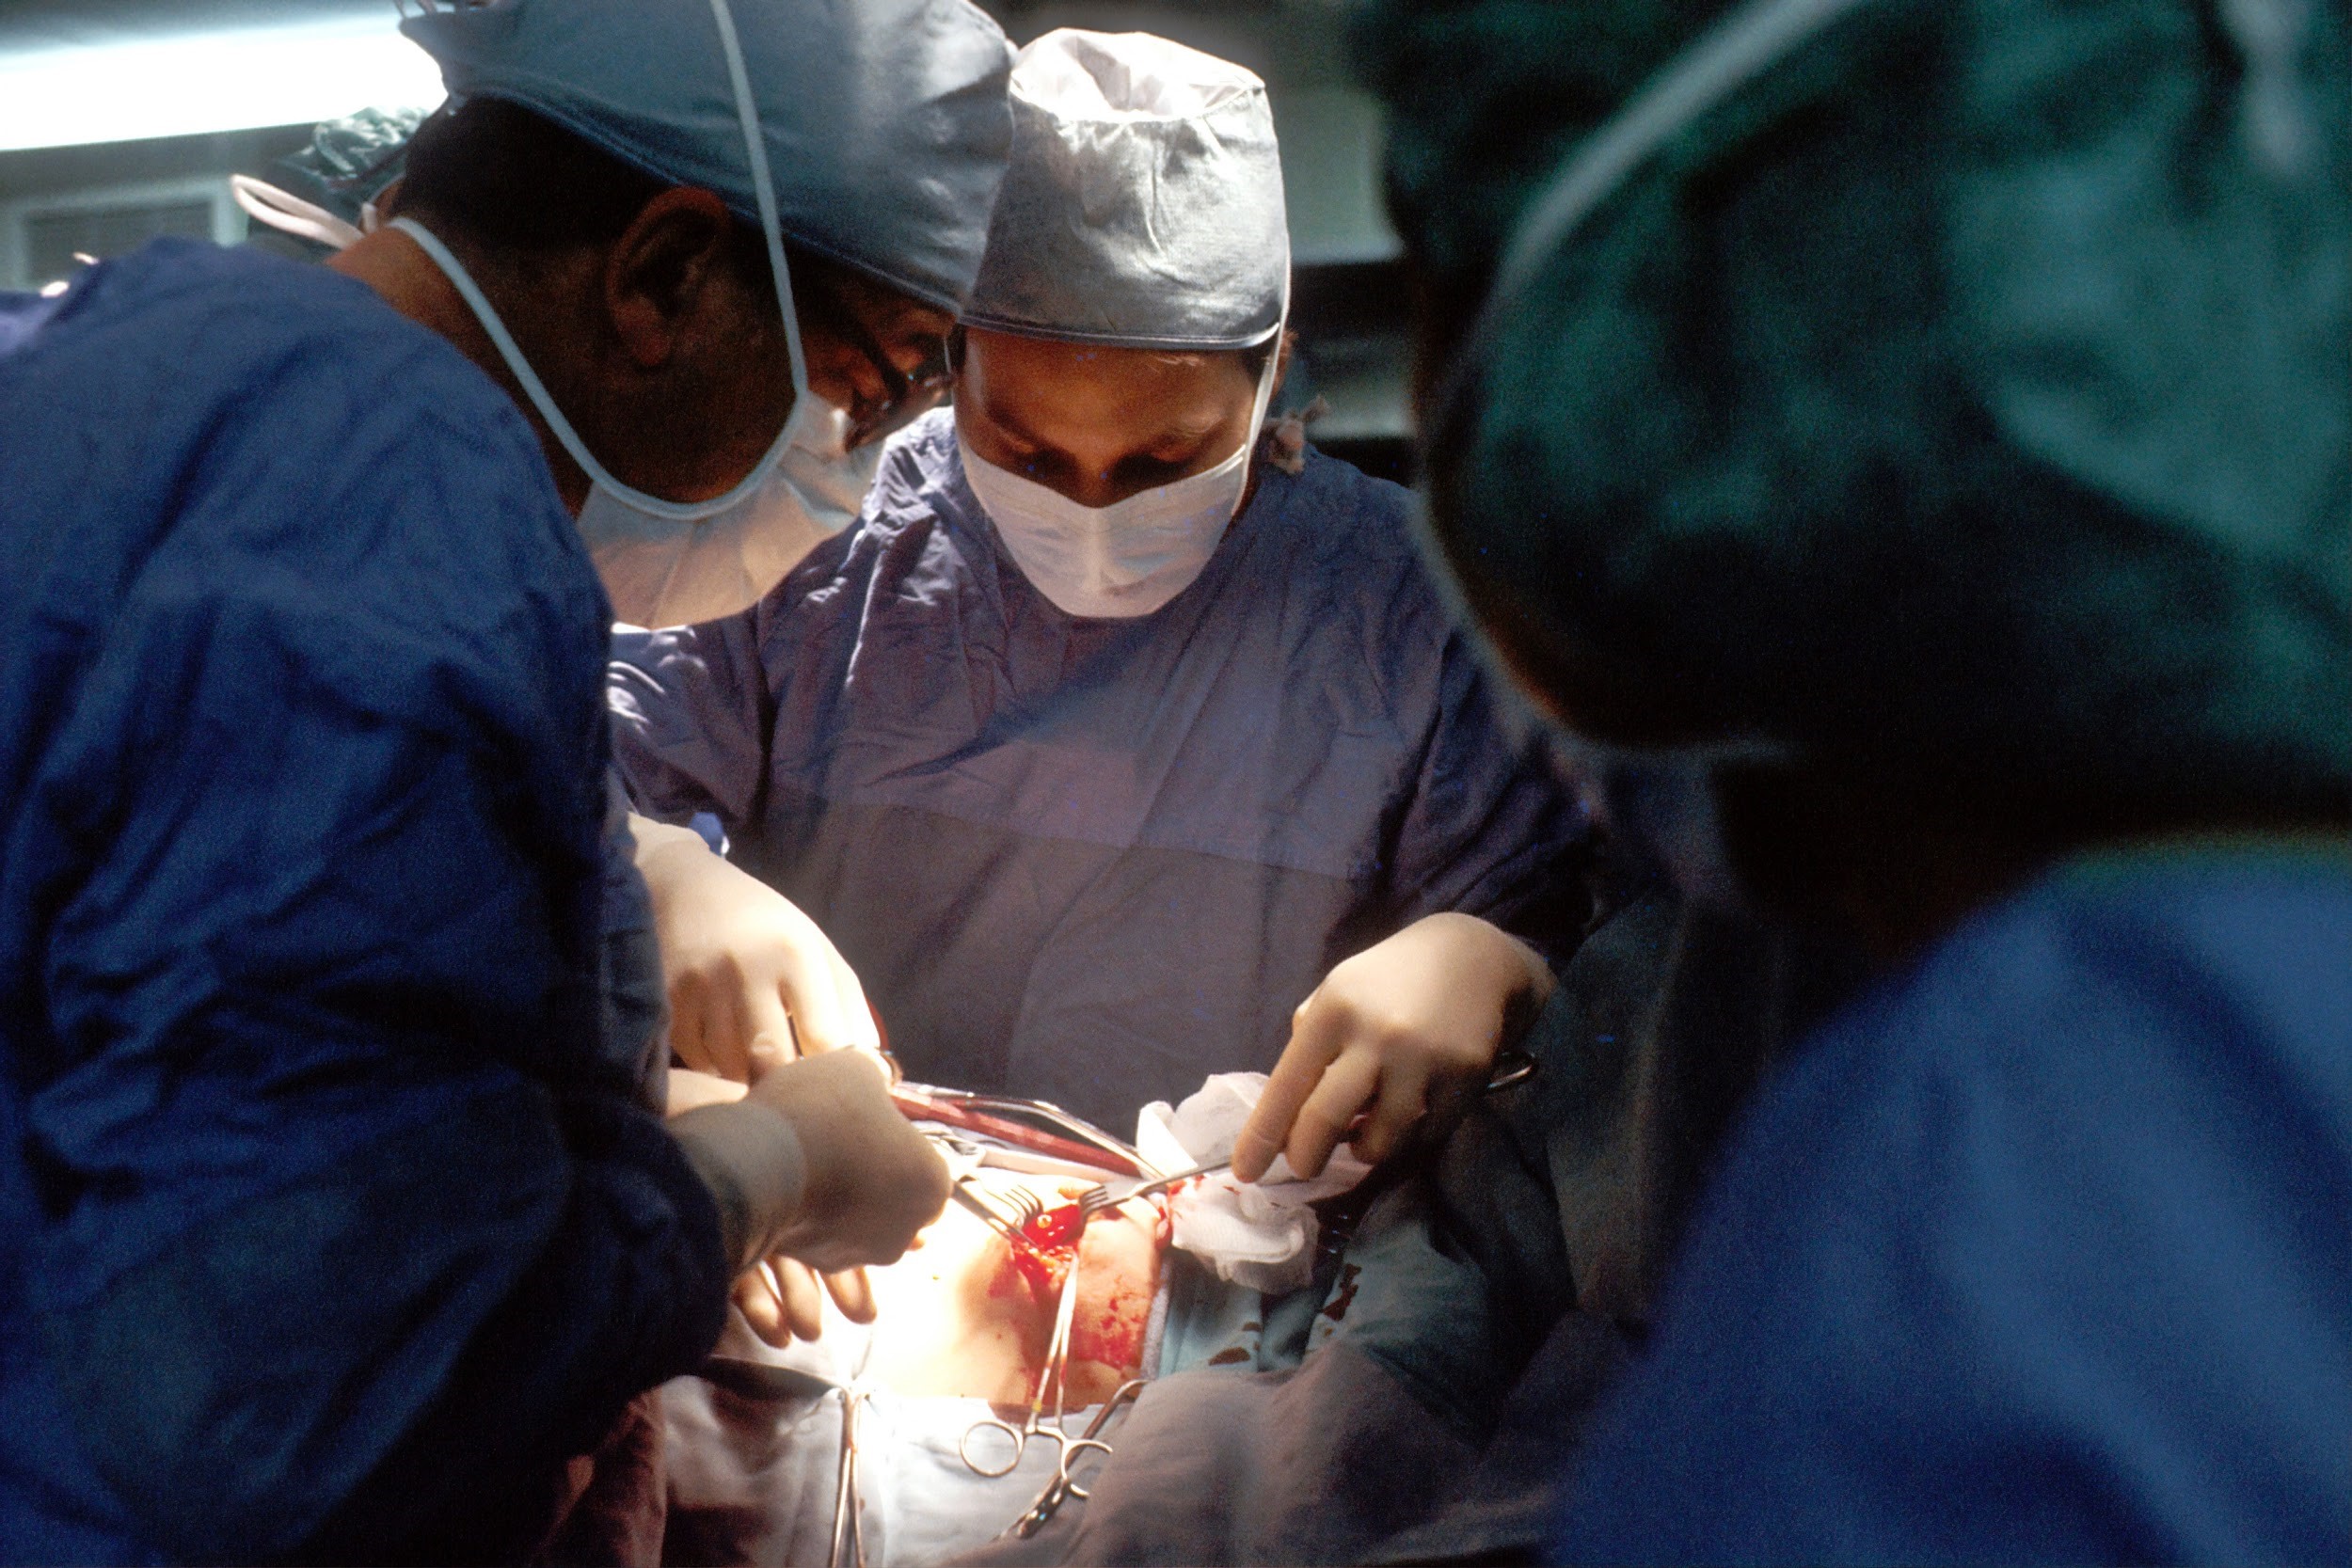 Surgical Errors: New Report Highlights Prevalence of Mistakes